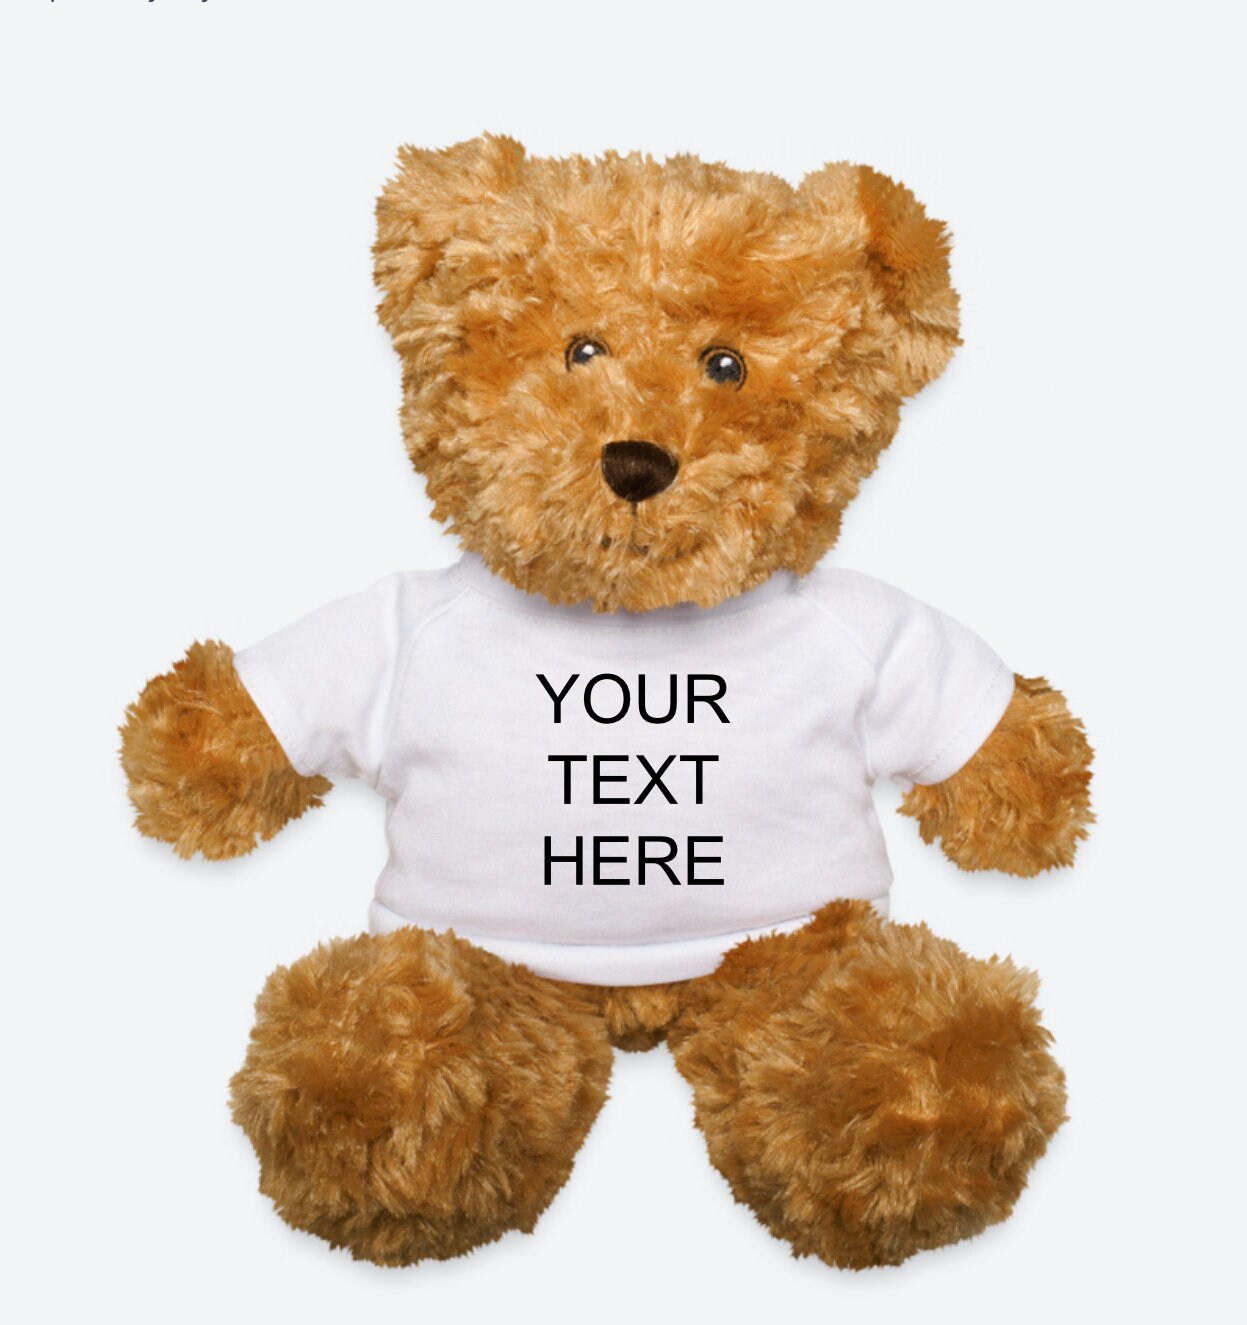 a teddy bear with a t - shirt that says your text here